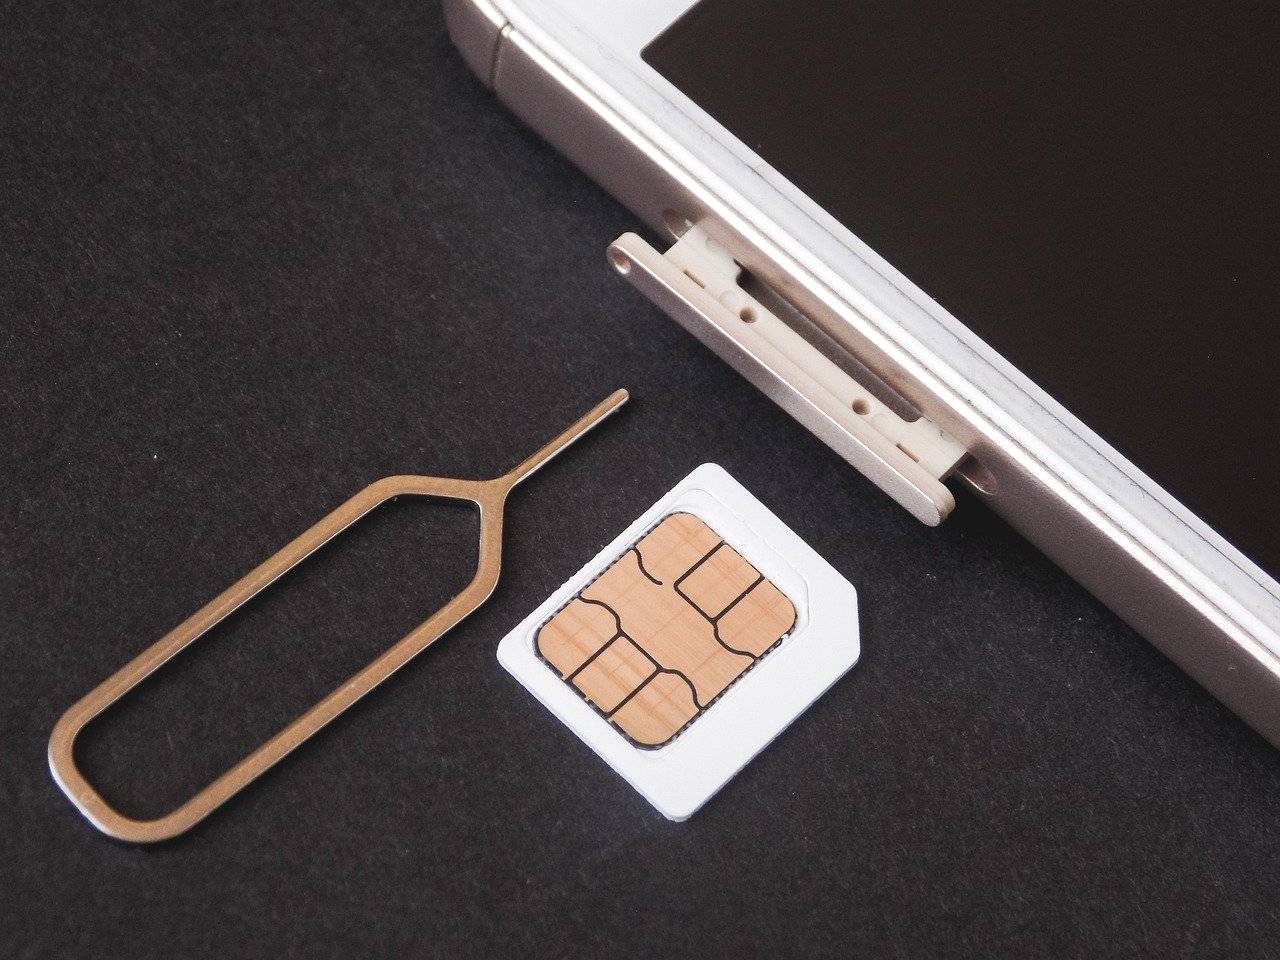 sim card and cellphone